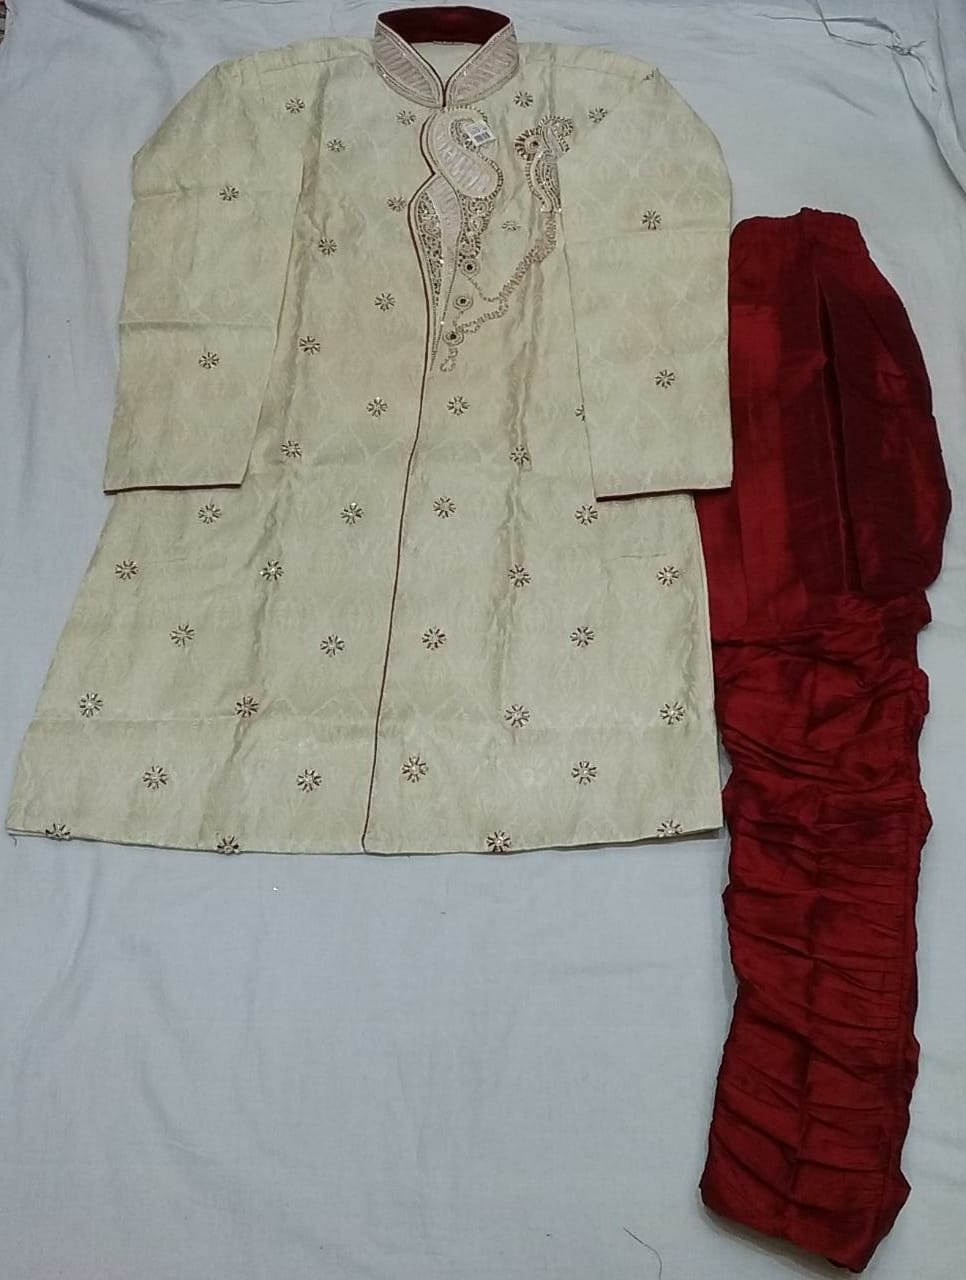 121538 A $216.00 MENS SHERWANI WITH BRITCHES PANT SIZE 40 (WEDDING SUIT)